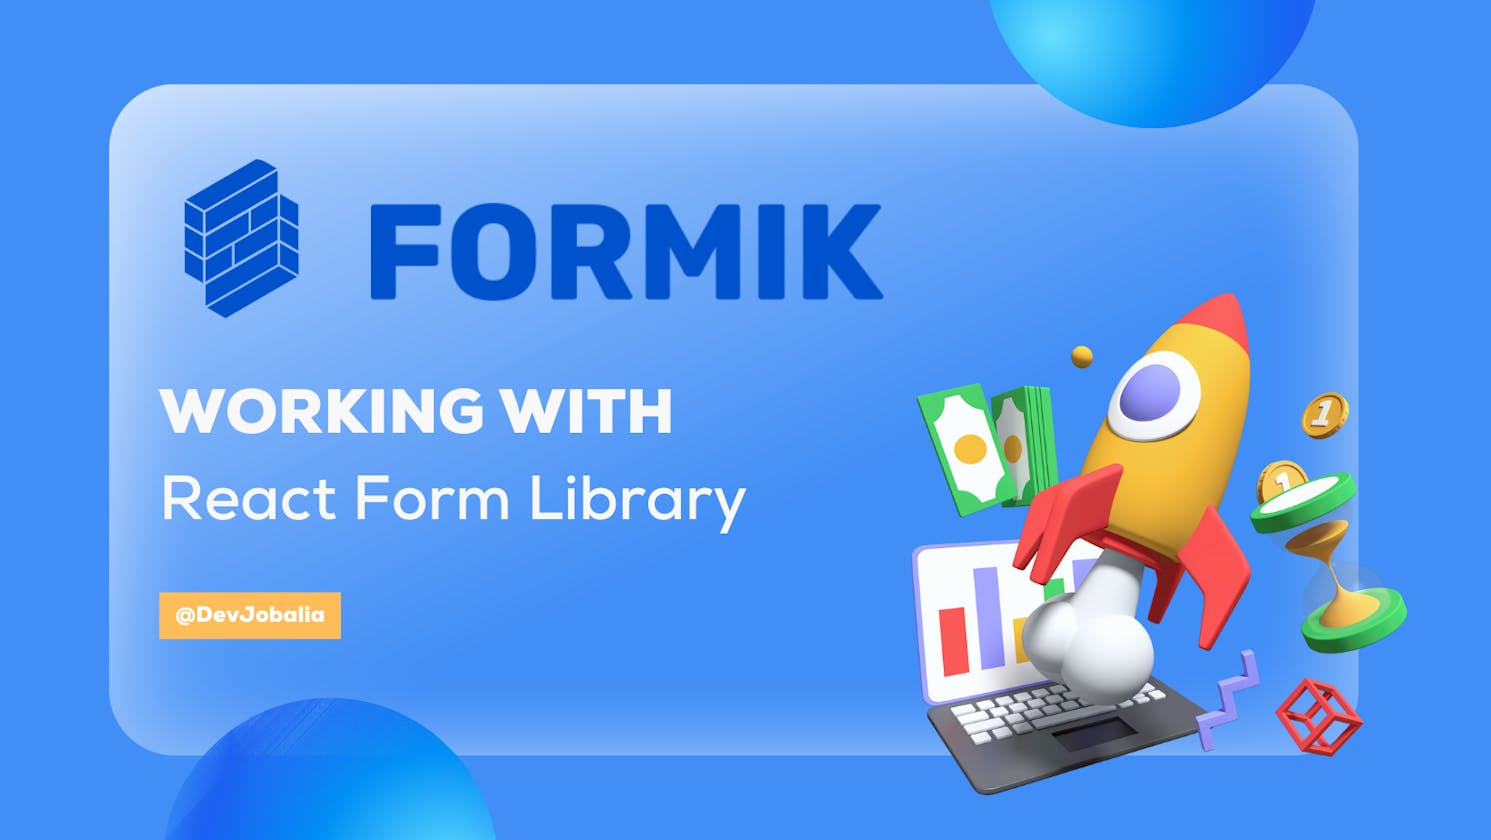 REACT FORM LIBRARY: Formik